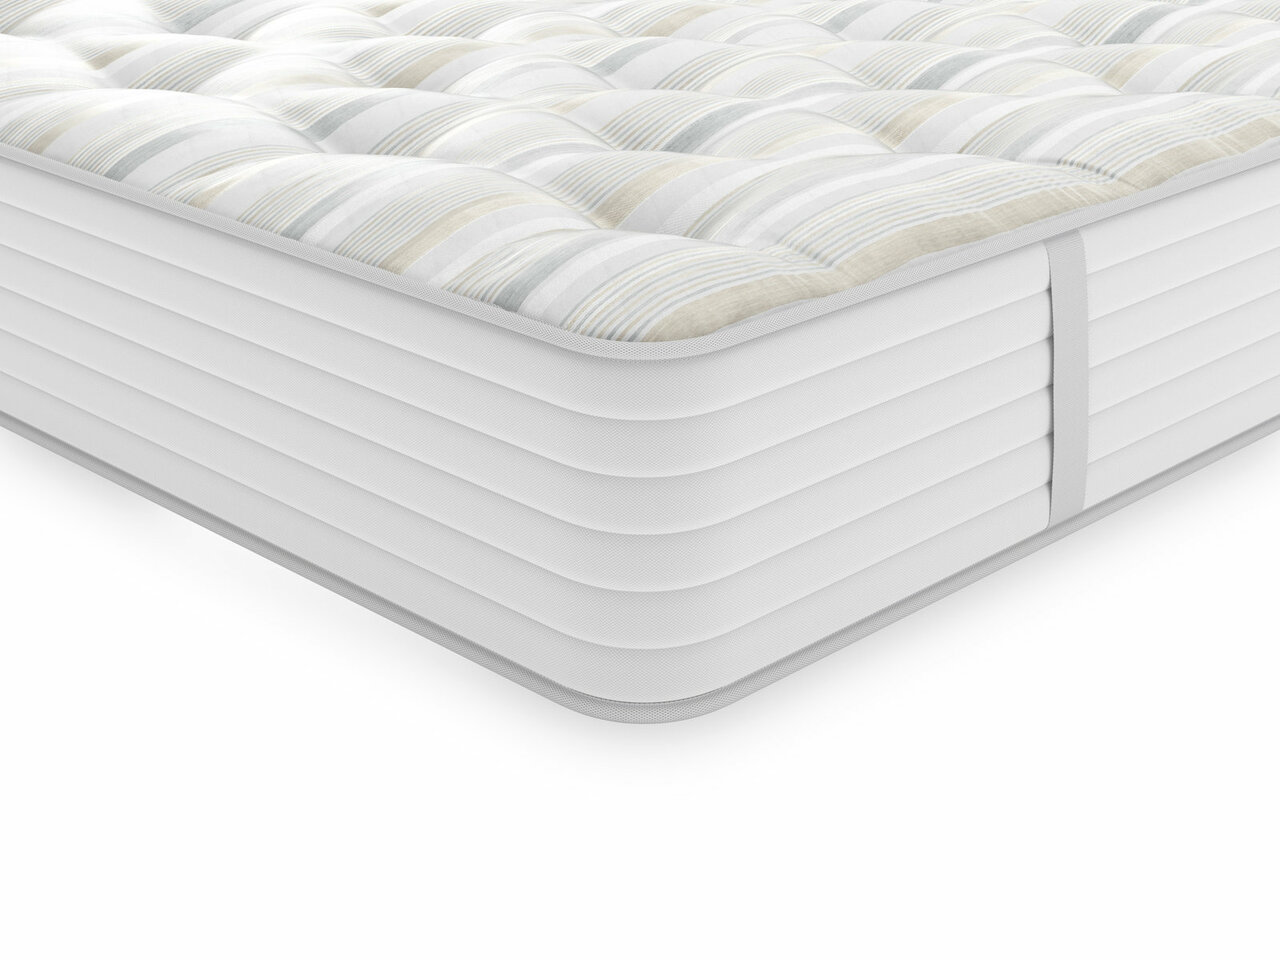 Sealy Fairfield Extra Firm Mattress - Bensons for Beds